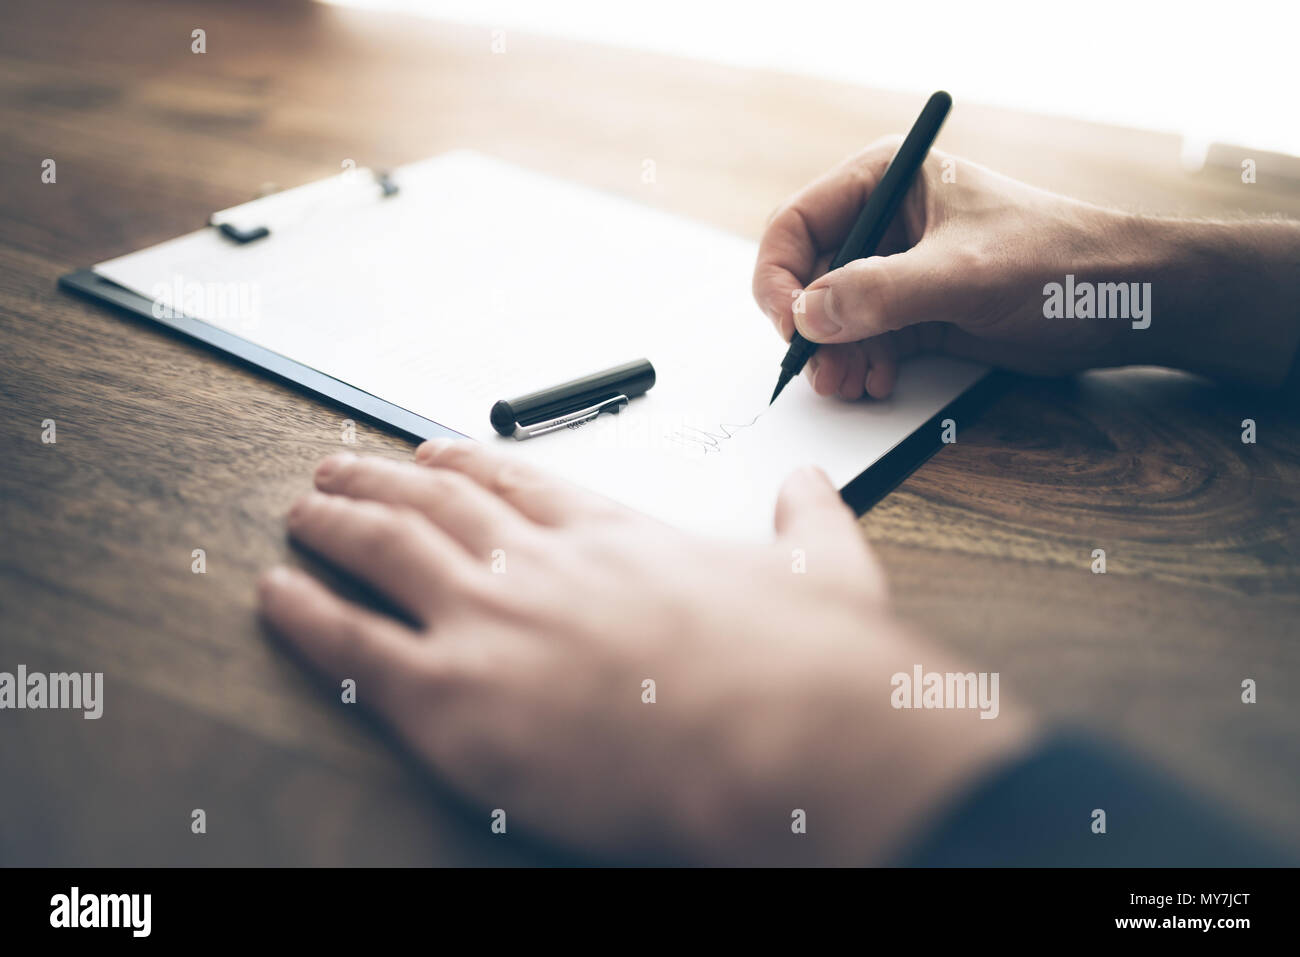 close-up of businessman signing contract or document on wooden desk Stock Photo